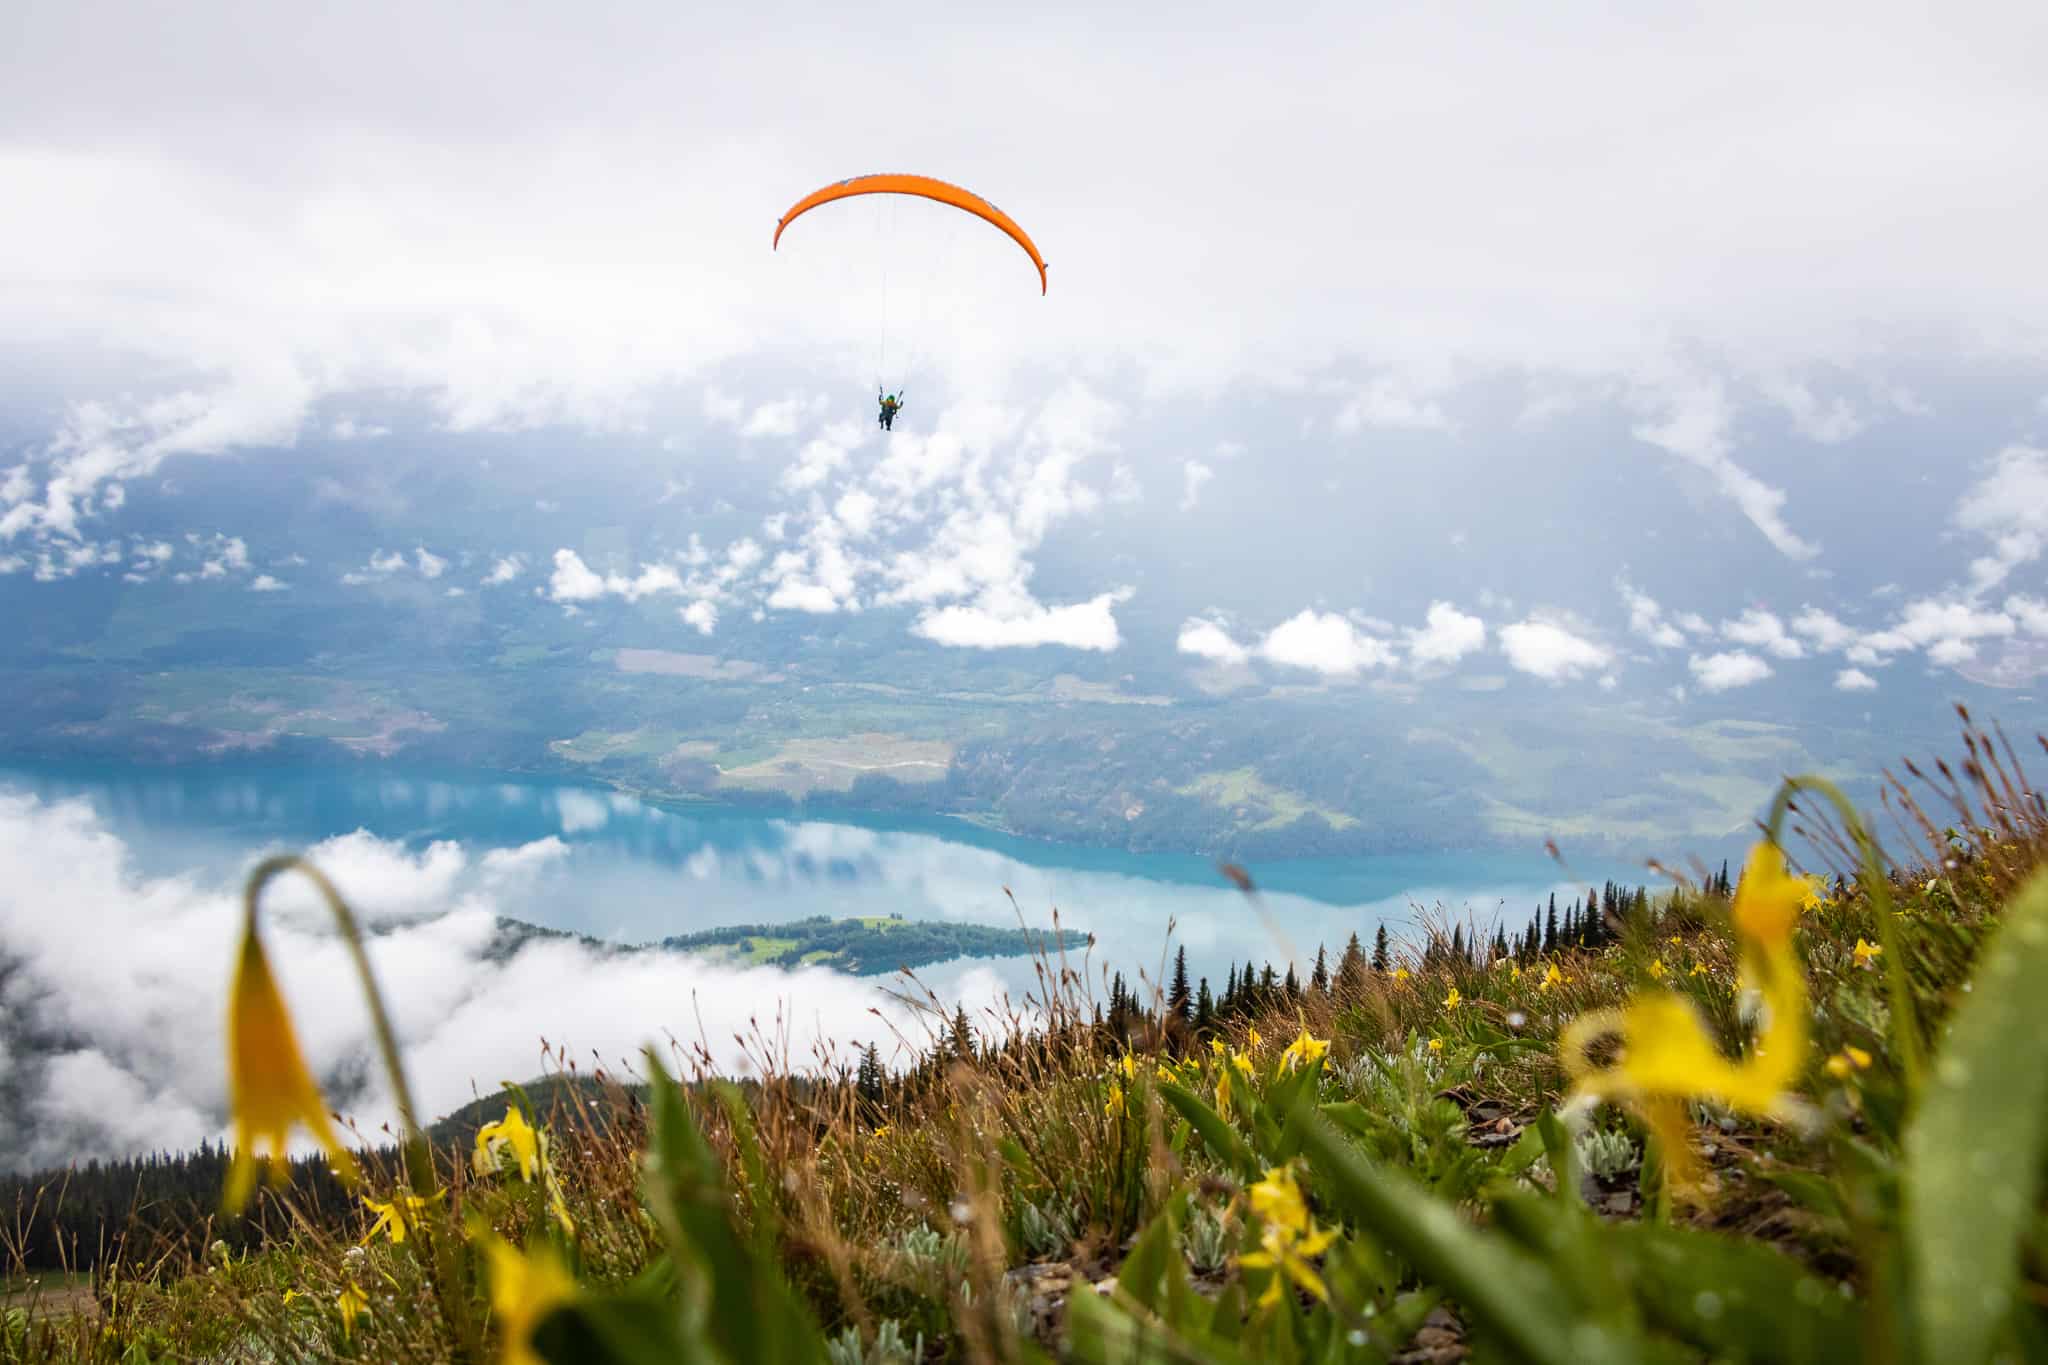 Paragliders and wildflowers in clouds